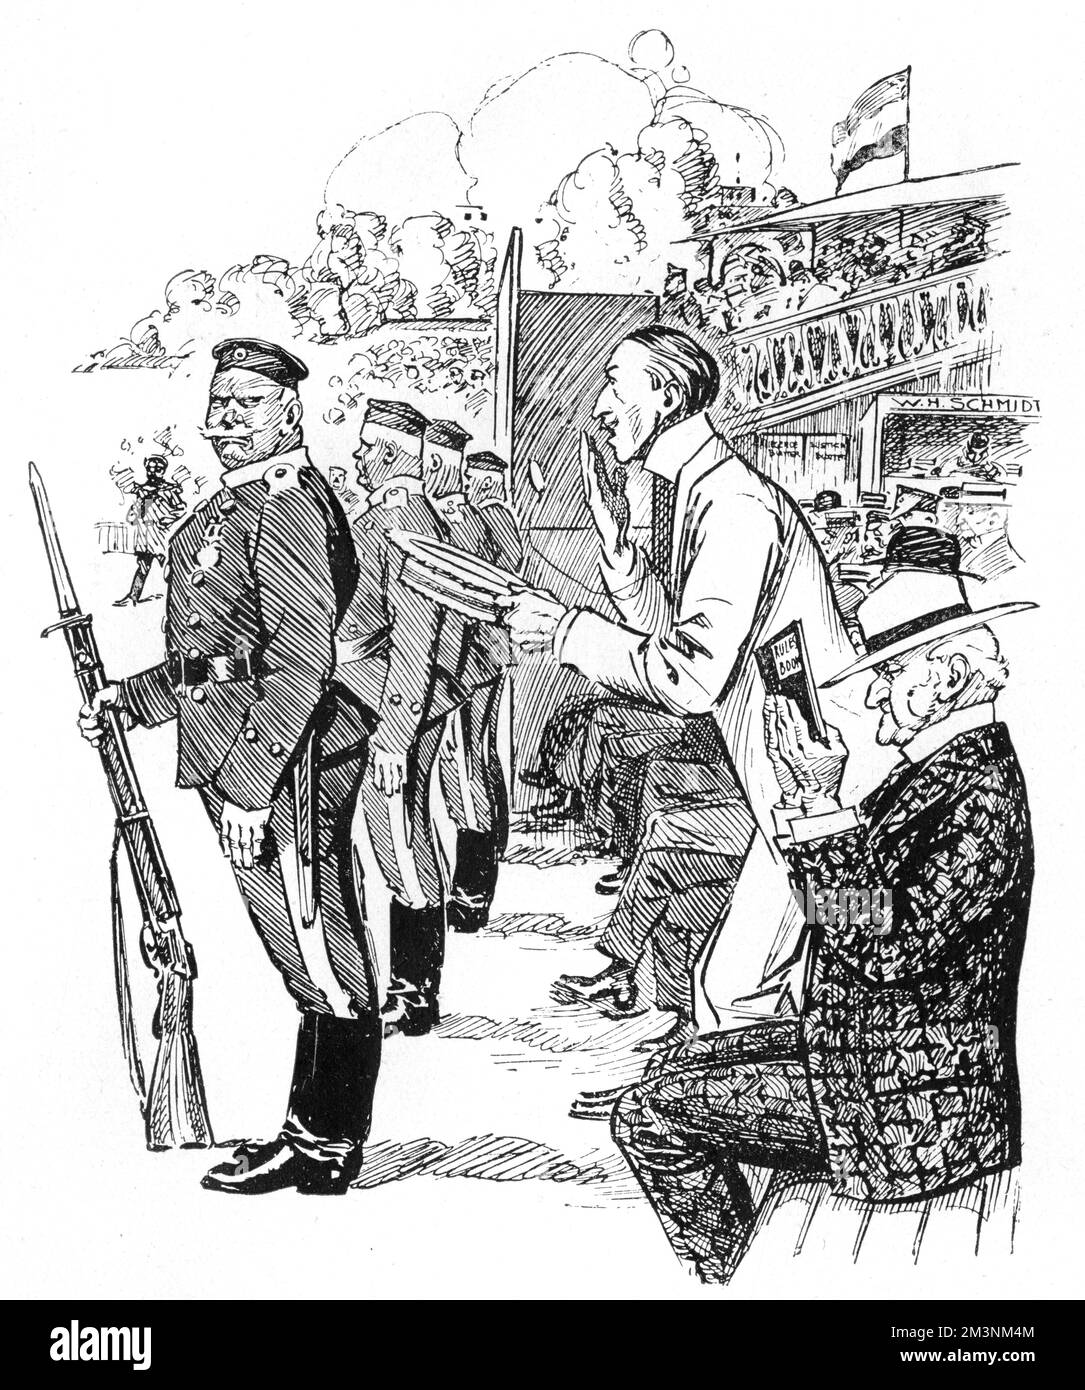 A light-hearted, humorous but also quite prescient look at what England might be like if German.  A scowl from a soldier with a bayonet reminds a spectator that cheering during a match is forbidden at Lord's cricket ground.  The cartoon reinforces stereotypes of the increasingly militarised German nation leading up to the outbreak of World War I.     Date: 1909 Stock Photo